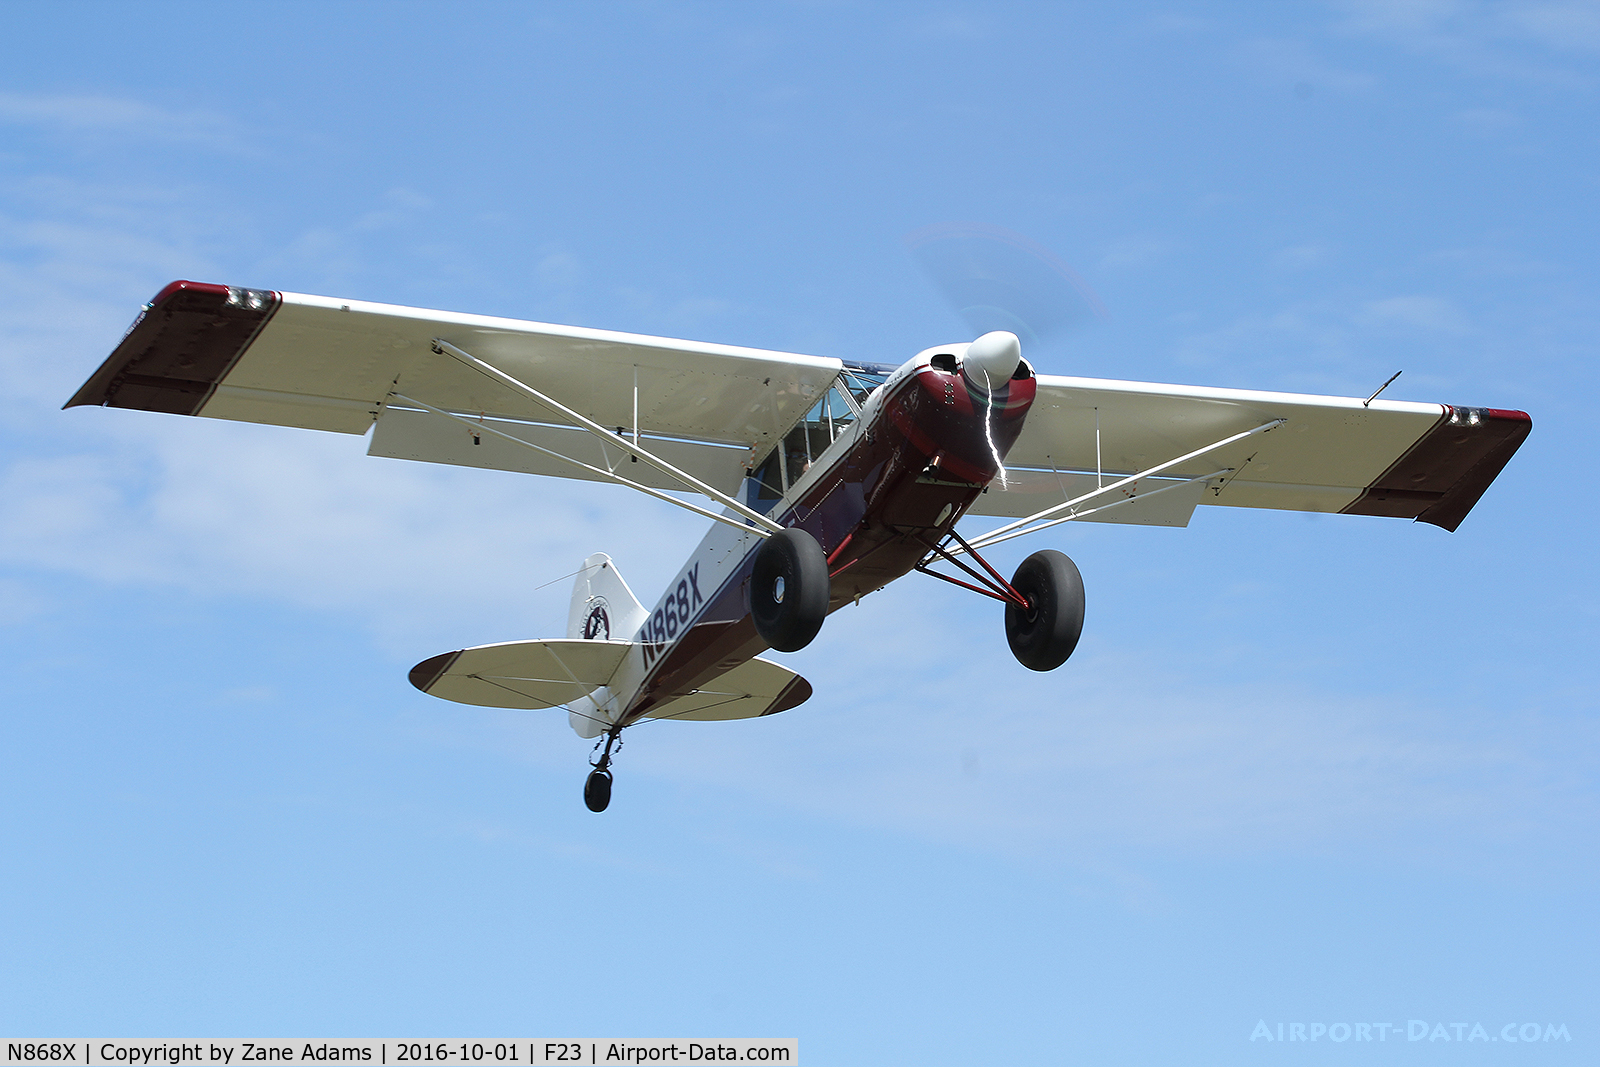 N868X, 2006 Aviat A-1B Husky C/N 2351, At the 2016 Ranger, Texas Fly-in